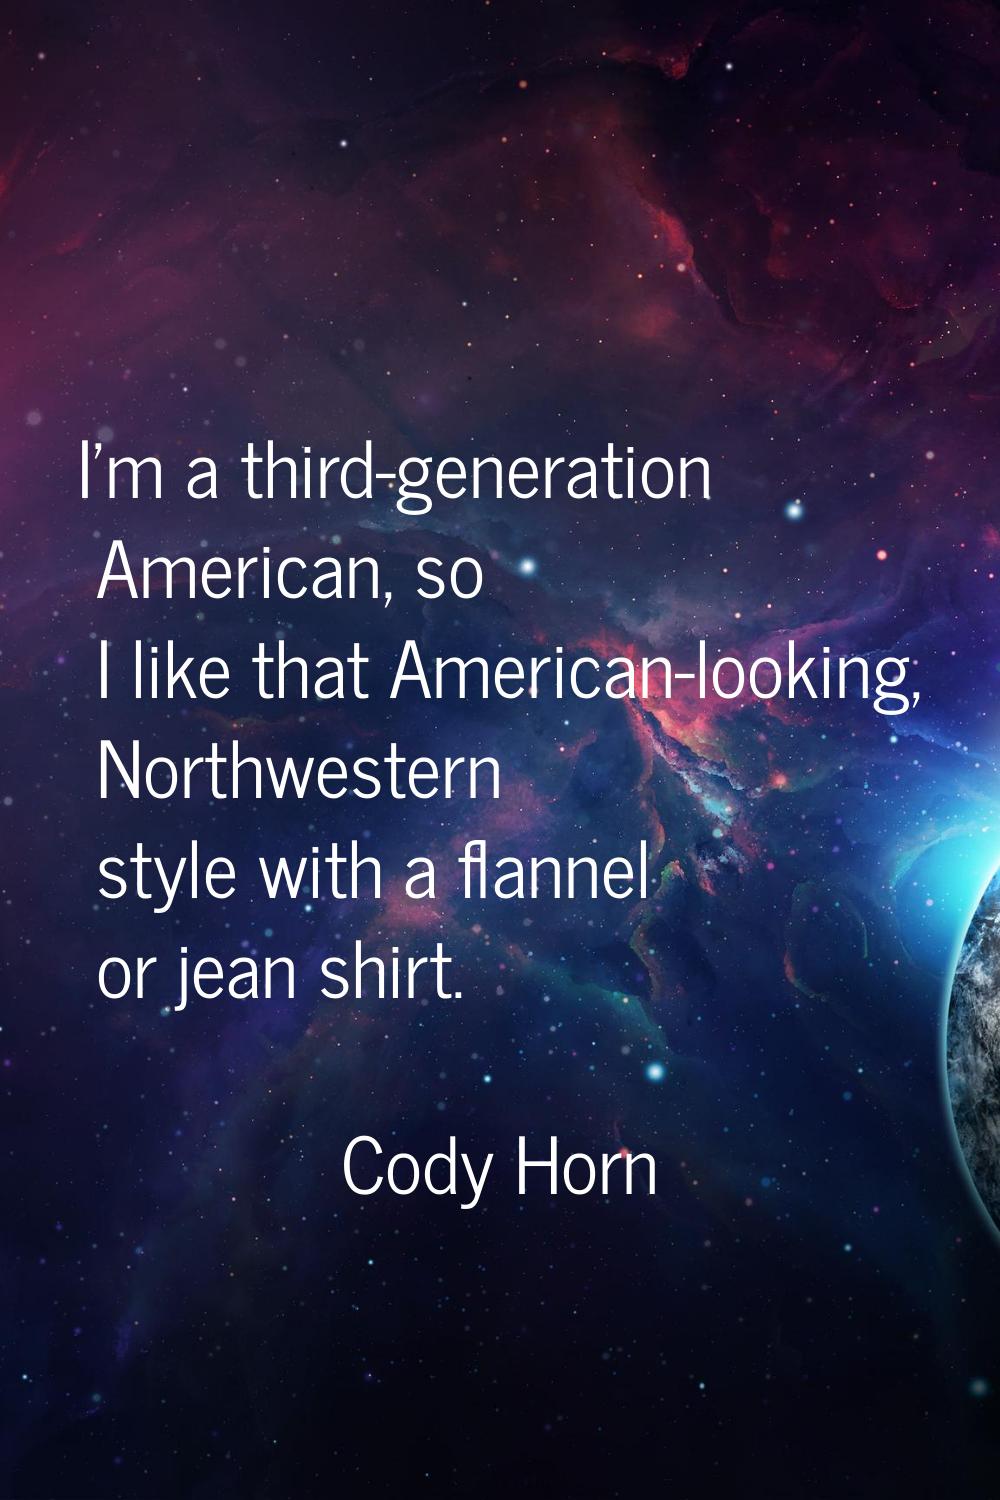 I'm a third-generation American, so I like that American-looking, Northwestern style with a flannel